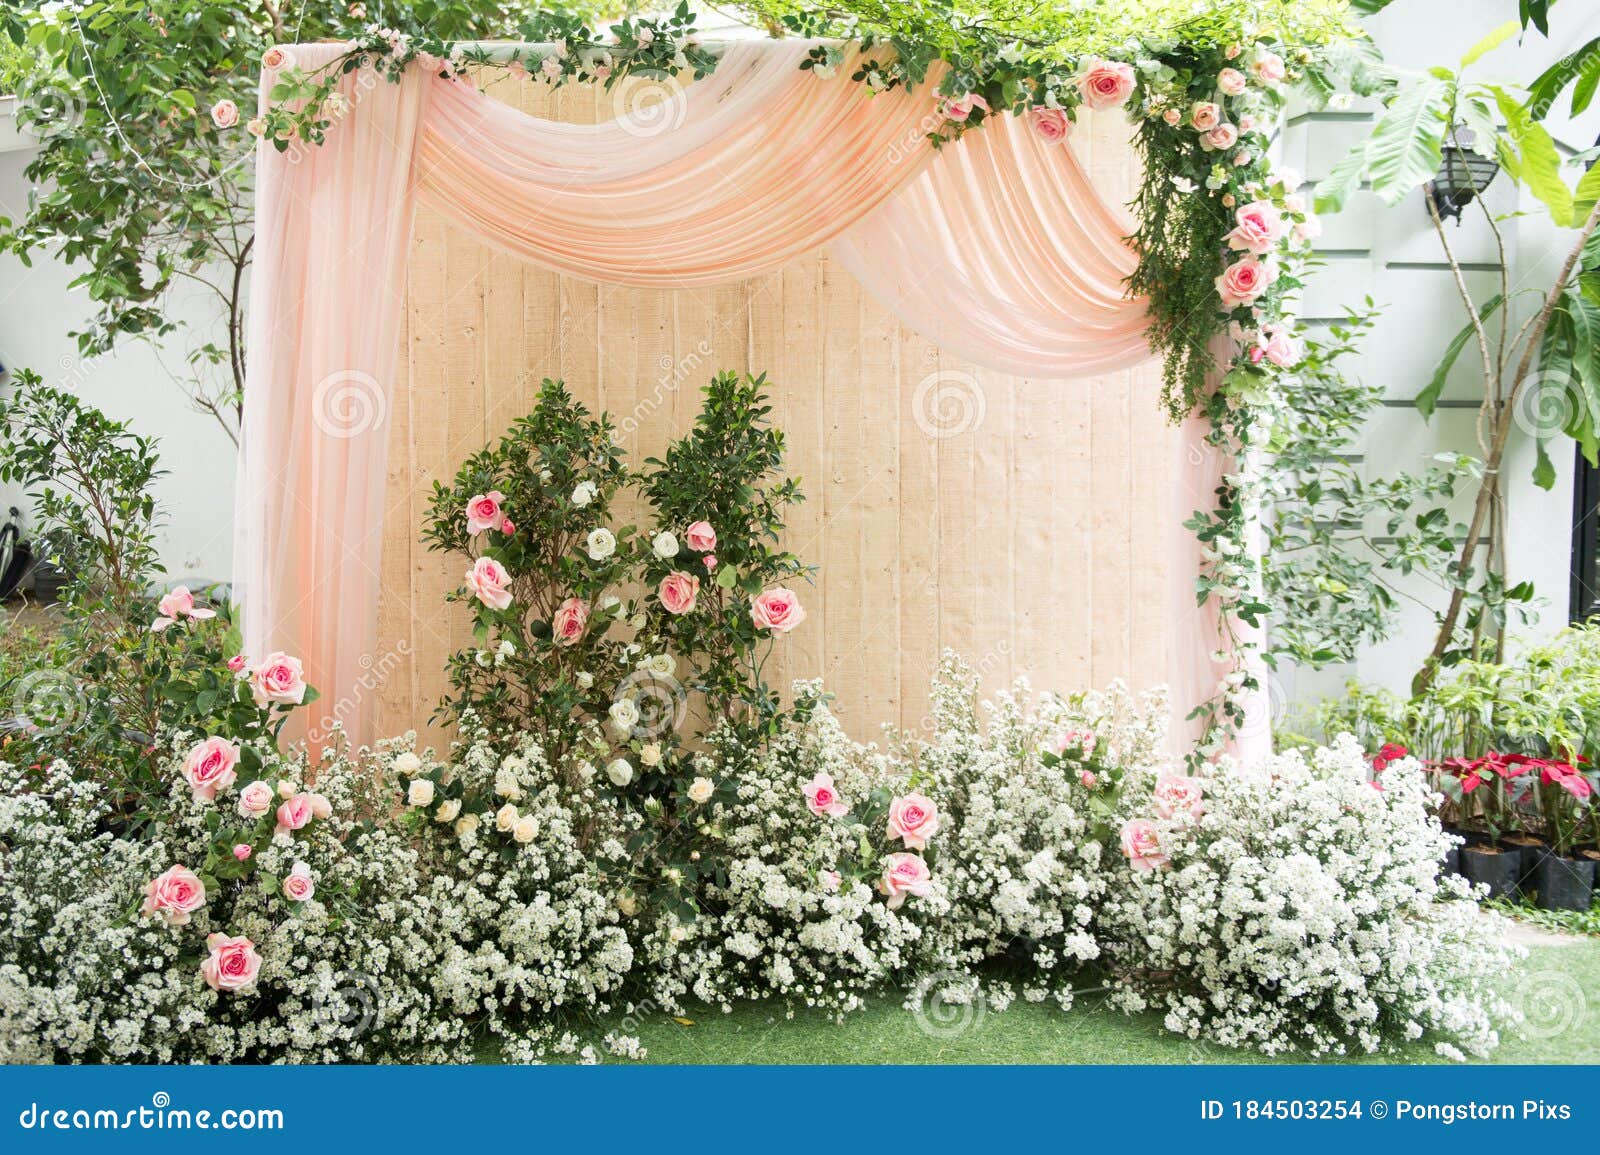 Wedding Ceremony Photography Background 7x5ft Arch Flowers Bouquet Outdoors Wedding Scene Celebration Party Invitation Background Green Grassland Trees Natural Landscape Backdrops 